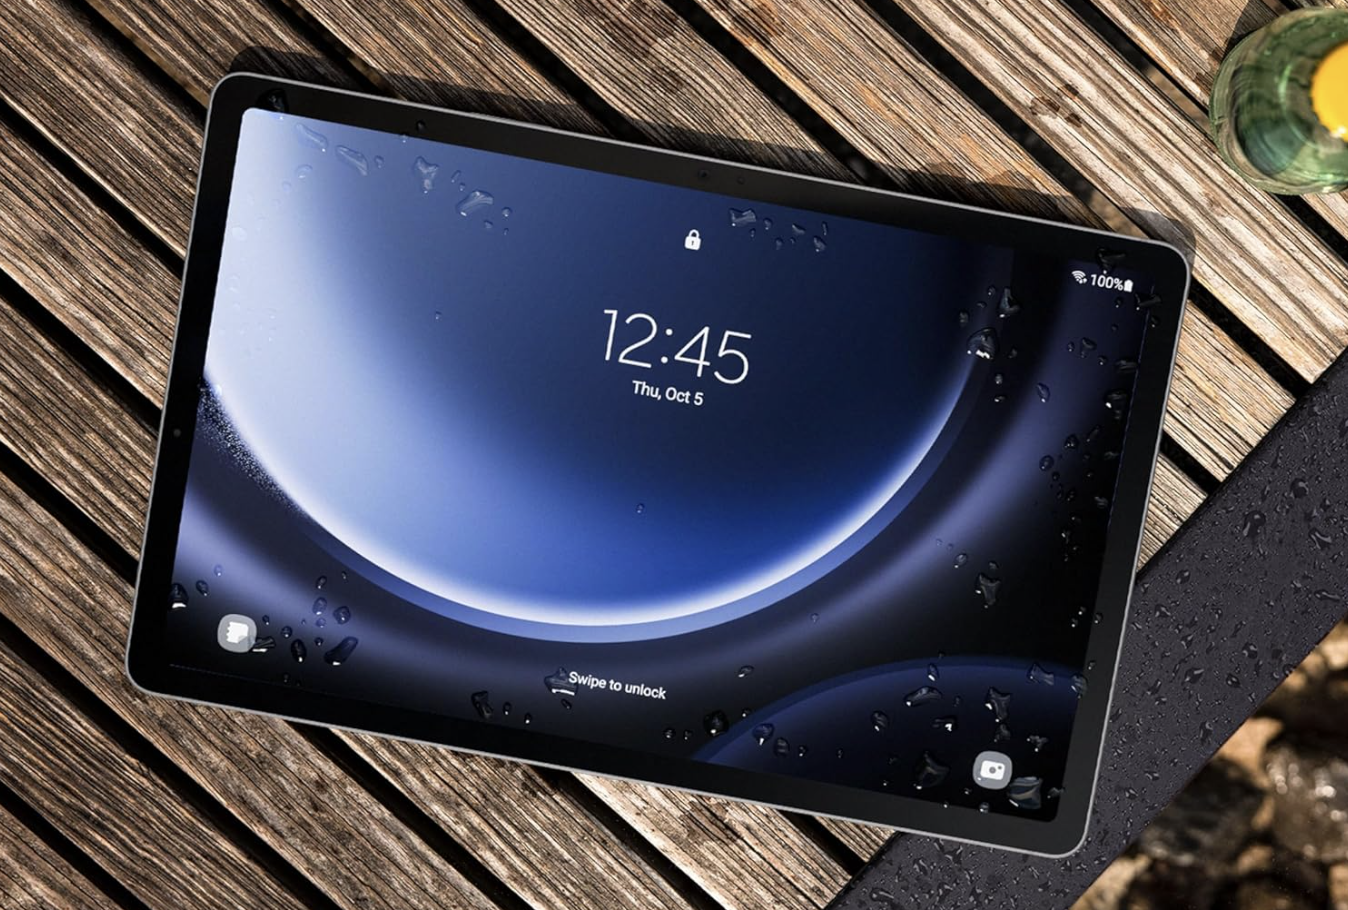 Samsung Galaxy Tab S9 FE: latest news, rumors and everything we know so far